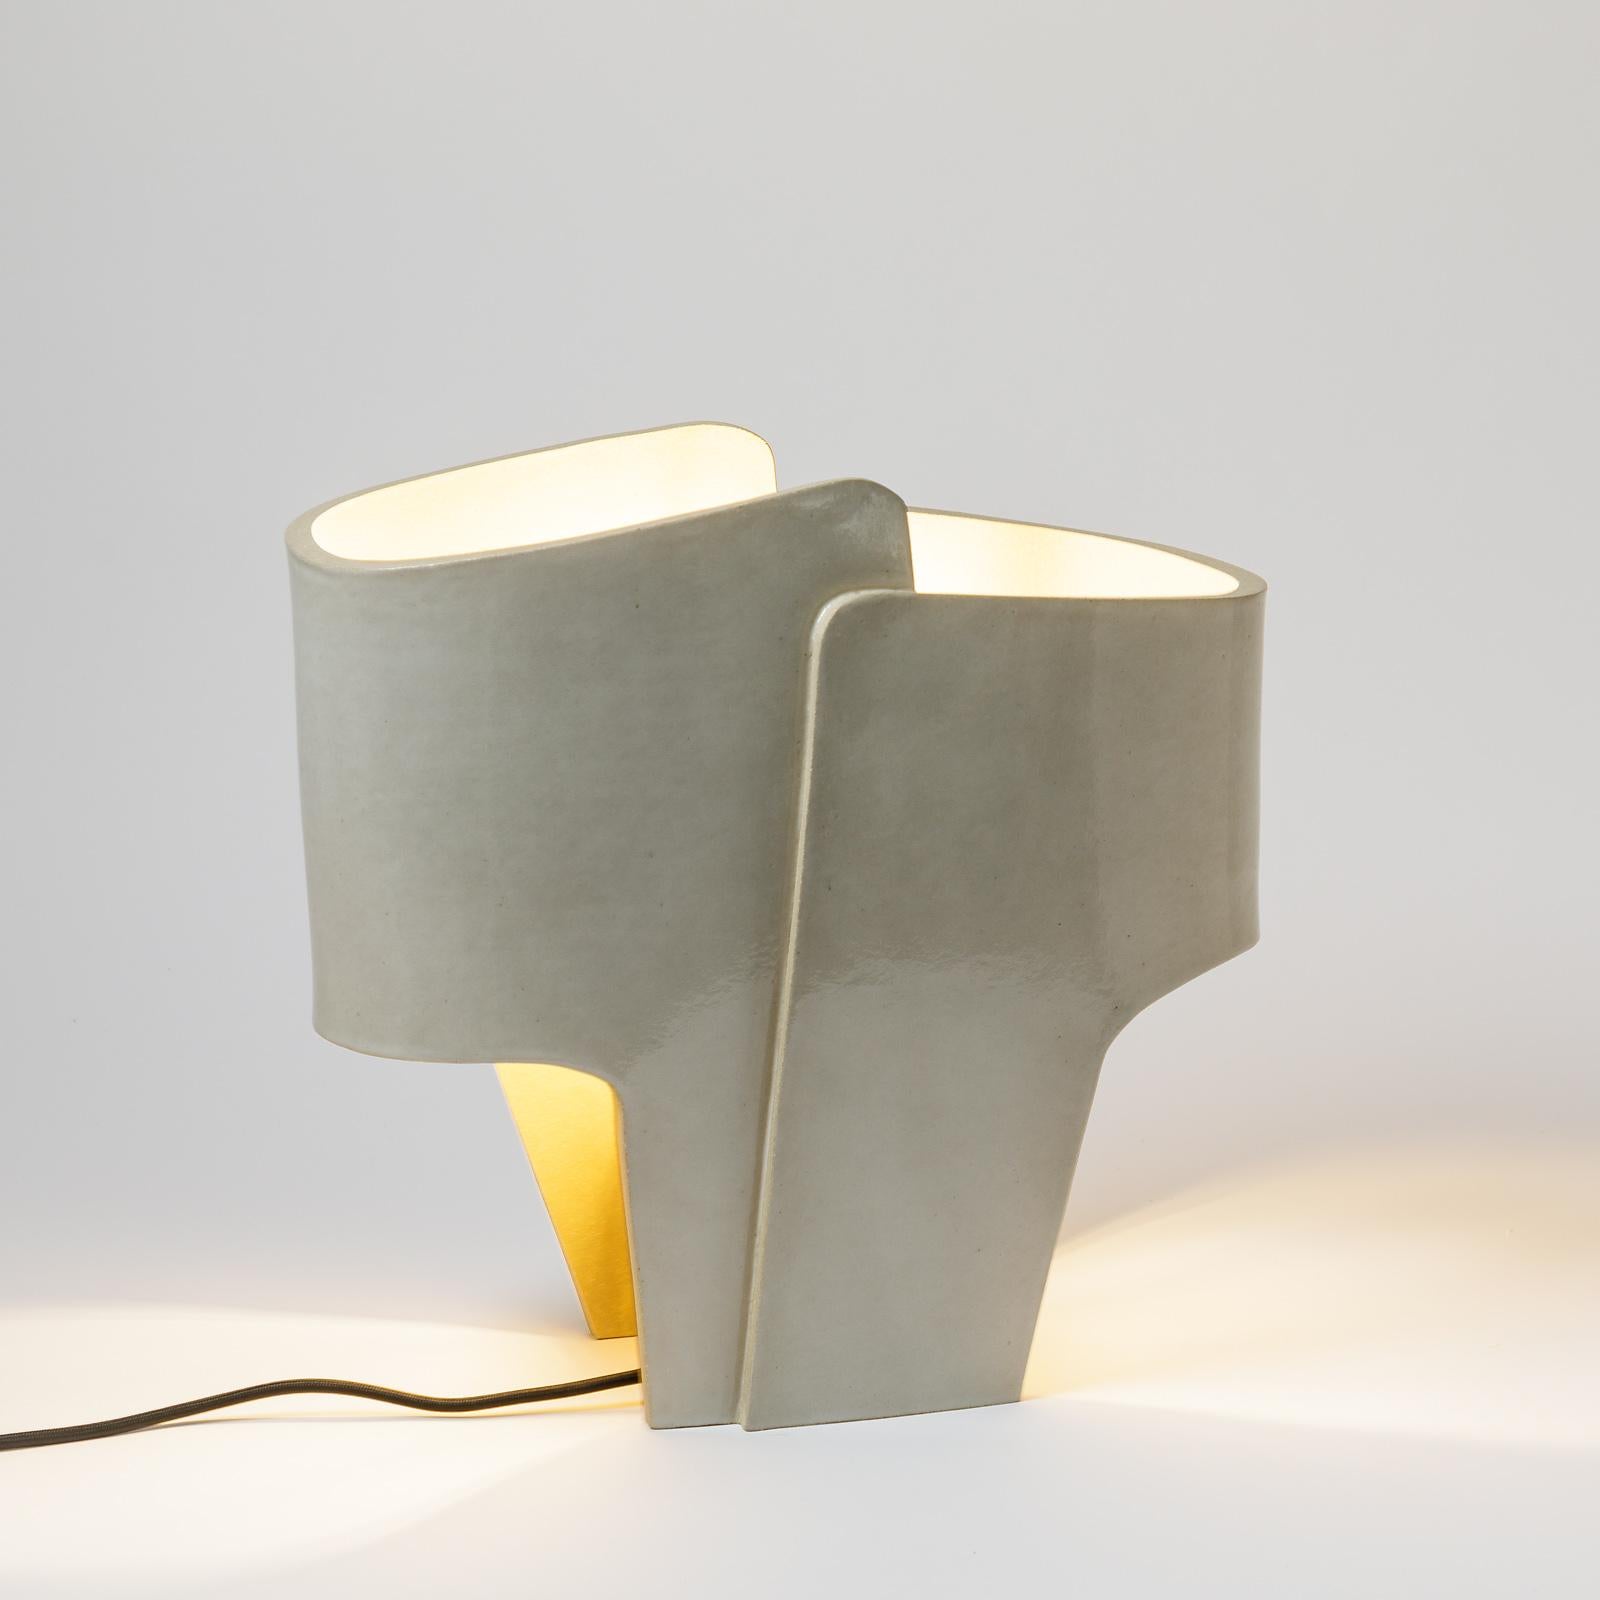 Ceramic Table with White Lamp by Denis Castaing, 2022 For Sale 2